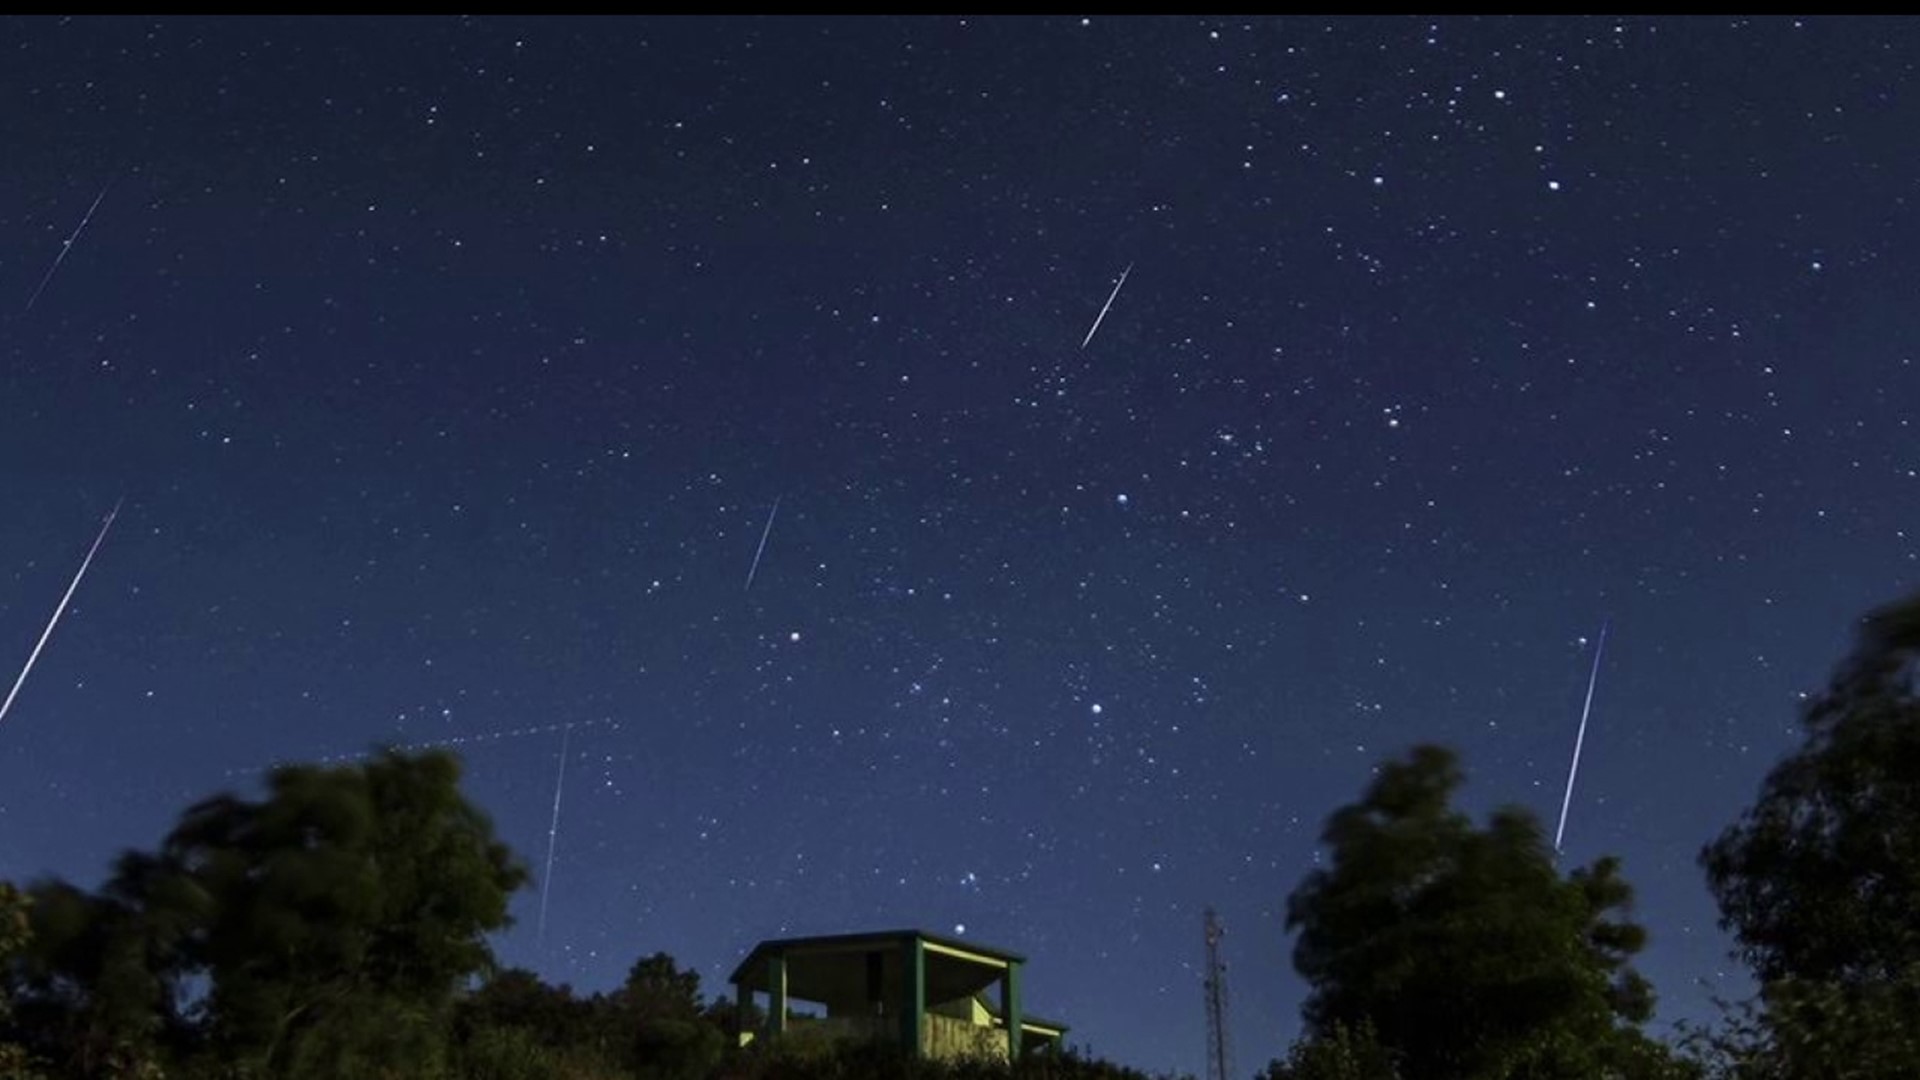 Geminid Meteor Shower 2022: When It Peaks and How to Watch